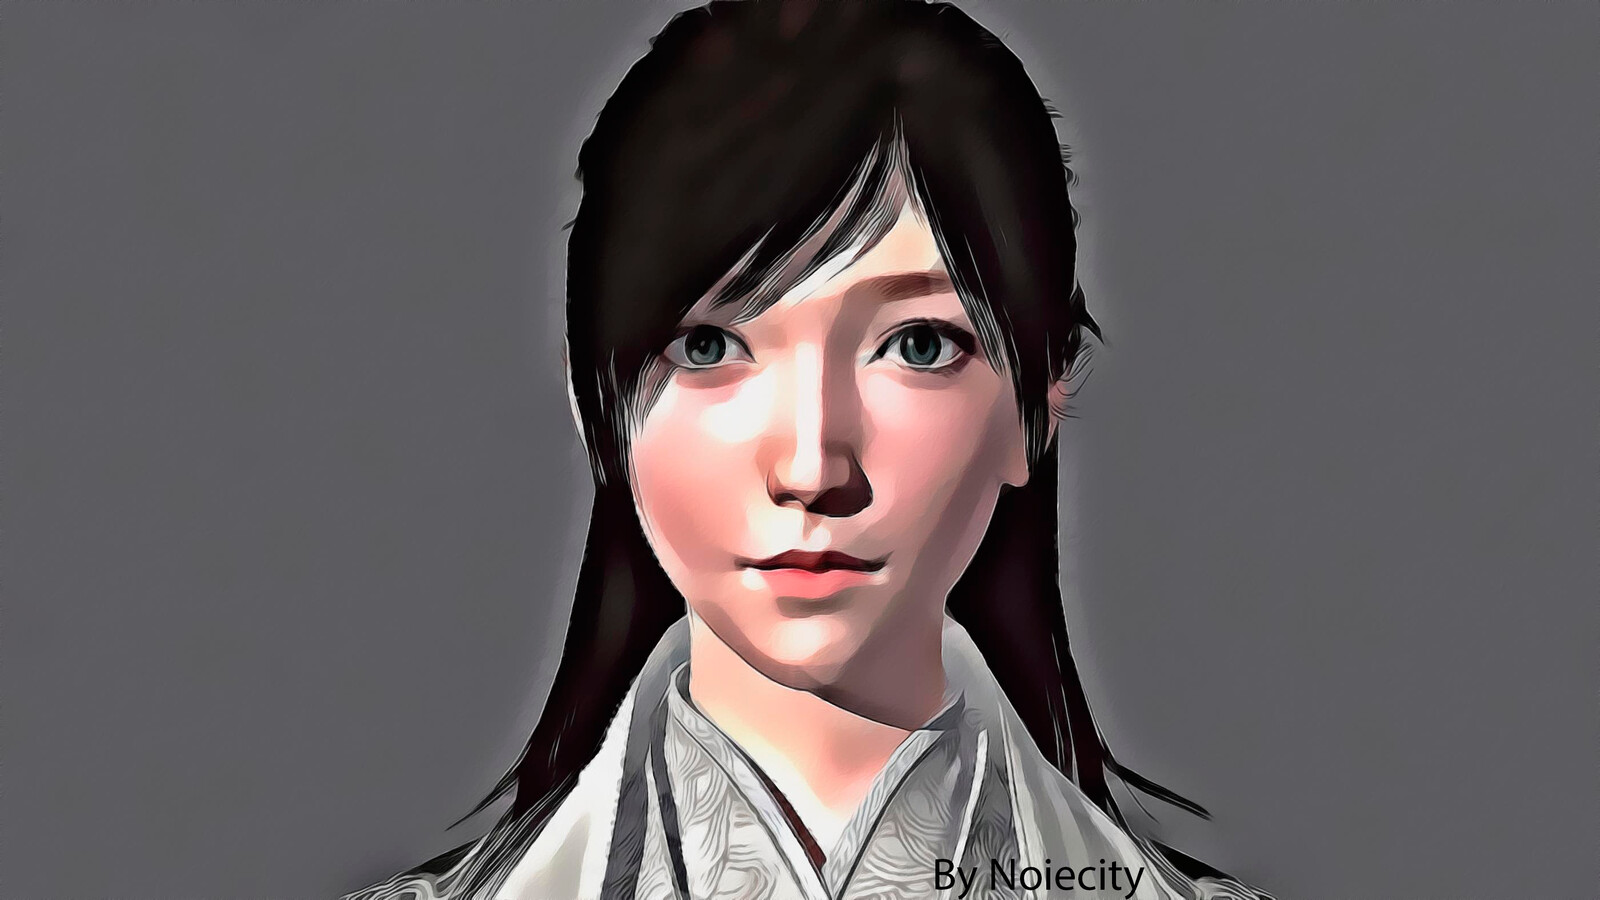 inspired in :
https://www.cgtrader.com/3d-models/character/woman/chinese-beauty-woman-female-pretty-girl-lady-3d-model-a3b75fec-7d40-4277-946a-6a7147808ec1